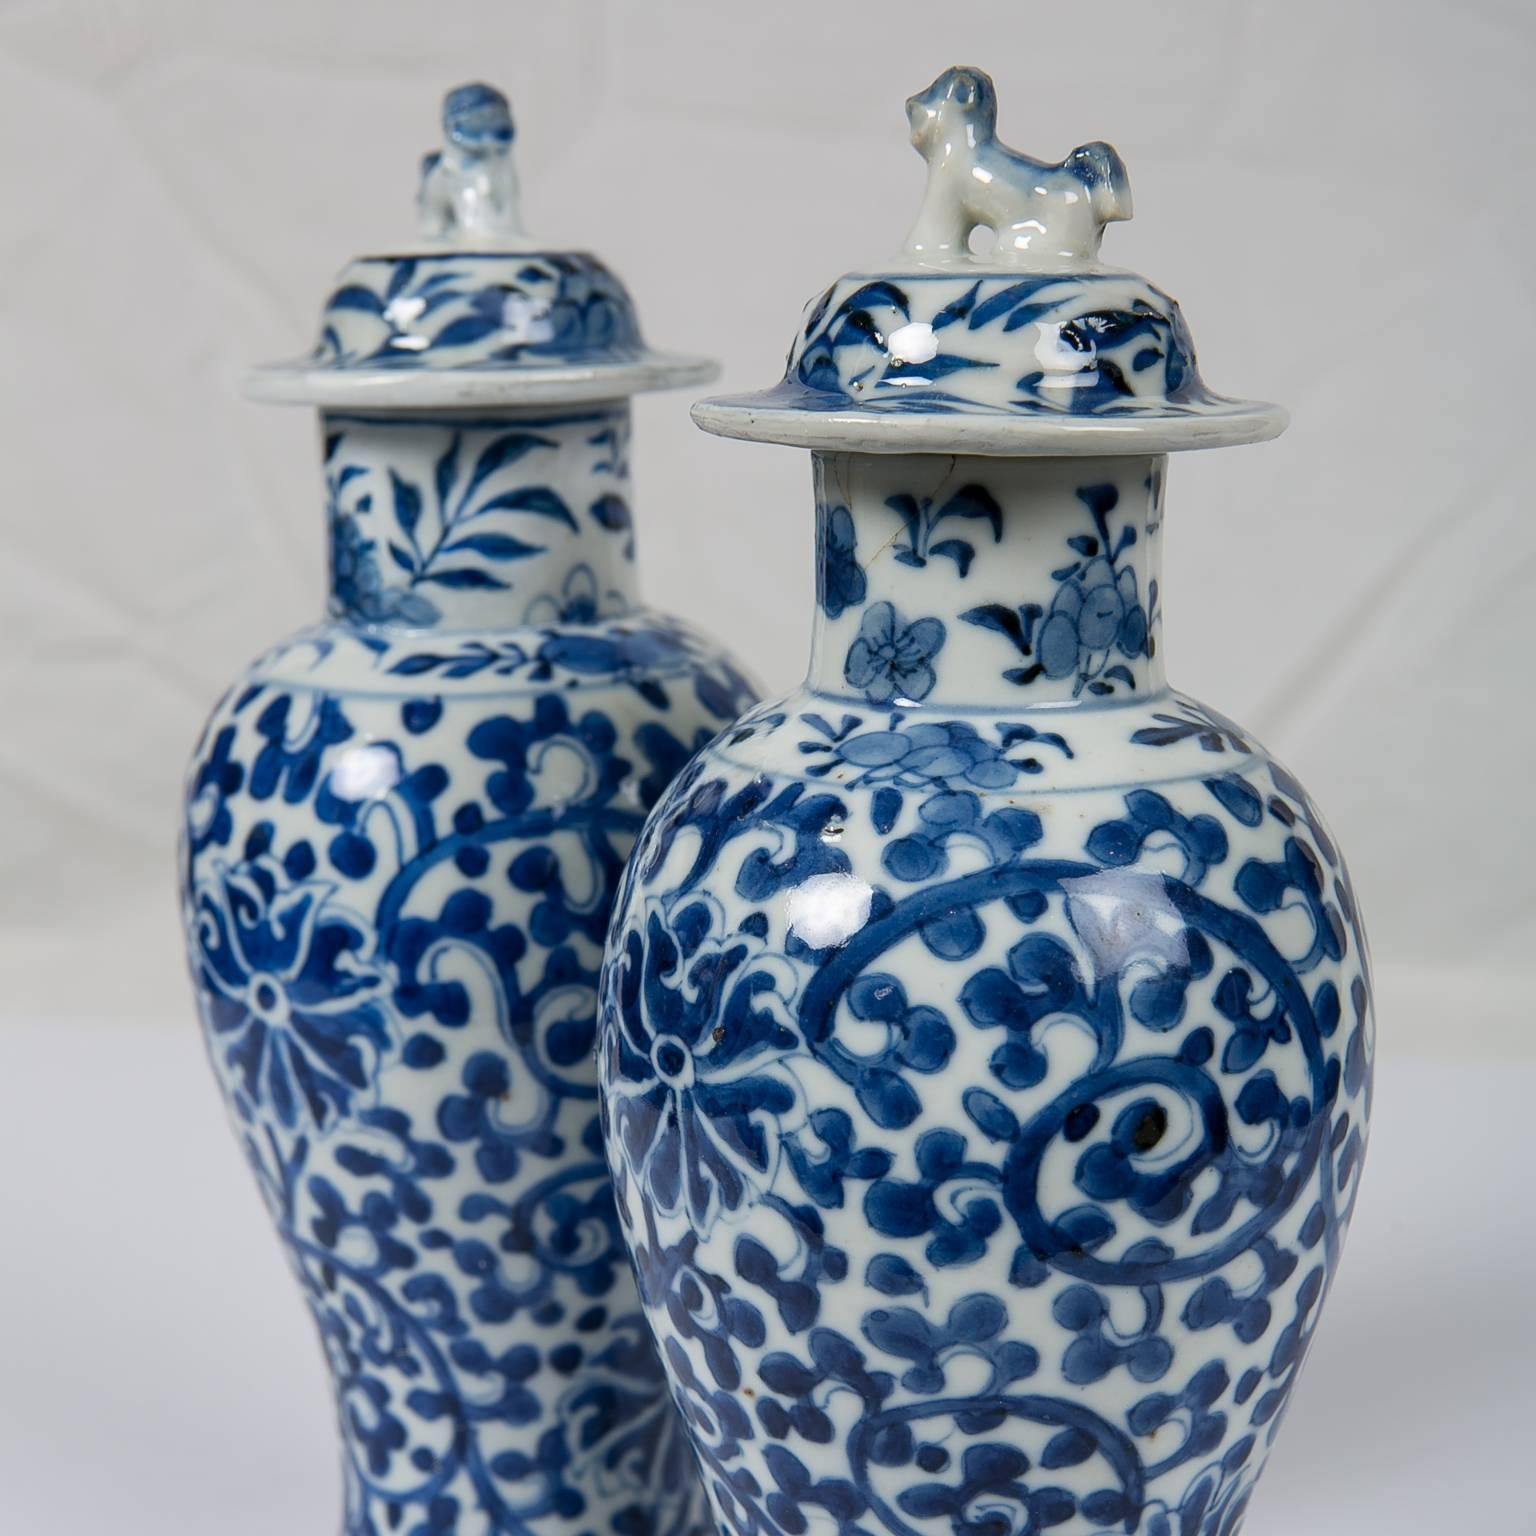 Qing Blue and White Chinese Porcelain Vases, Pair